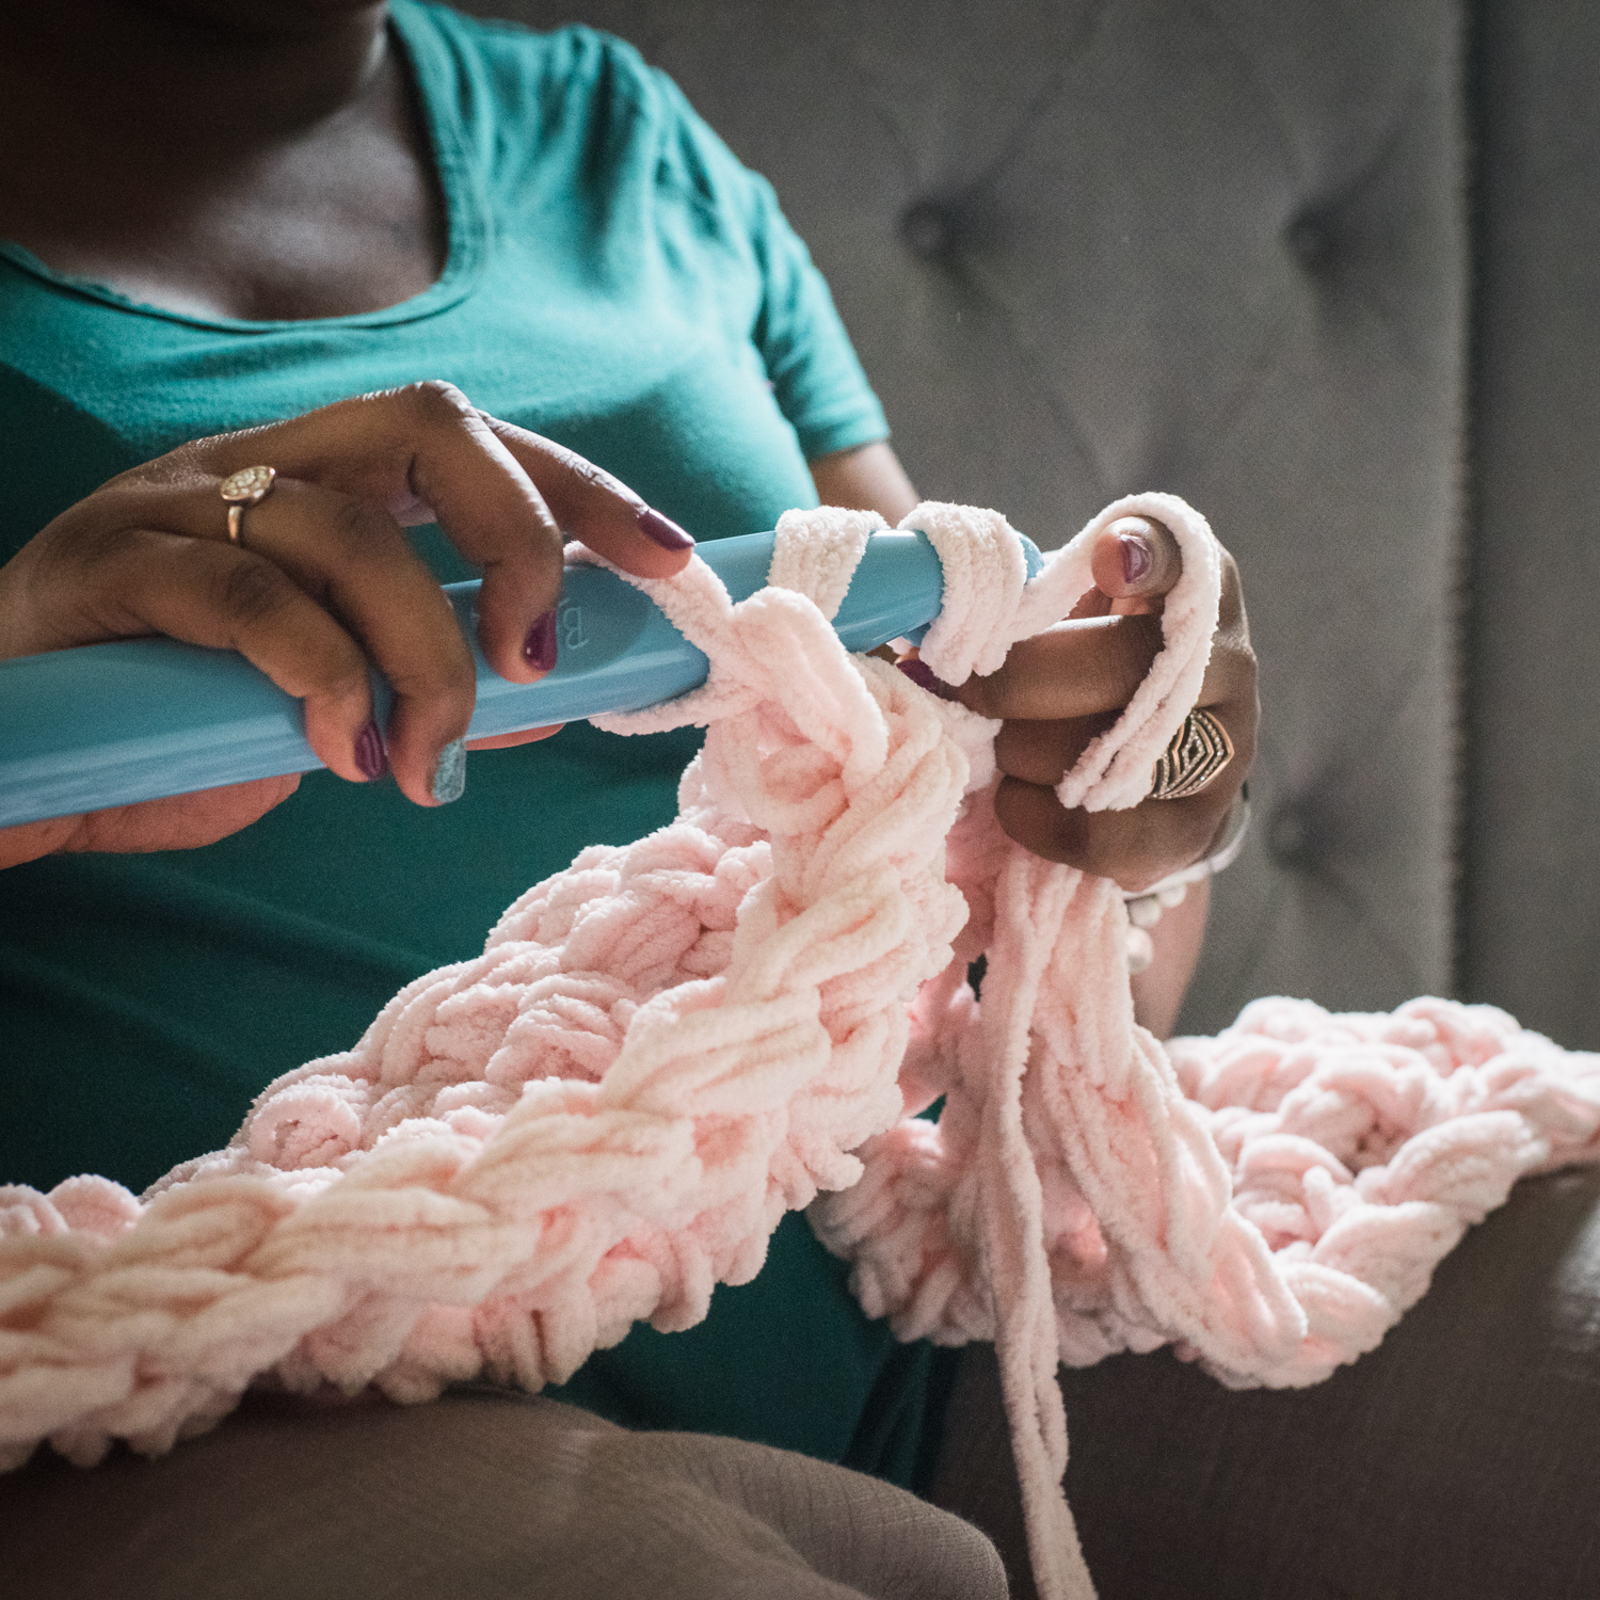 detail of a woman crocheting, photographed as part of a brand shoot by jamie bannon photography.